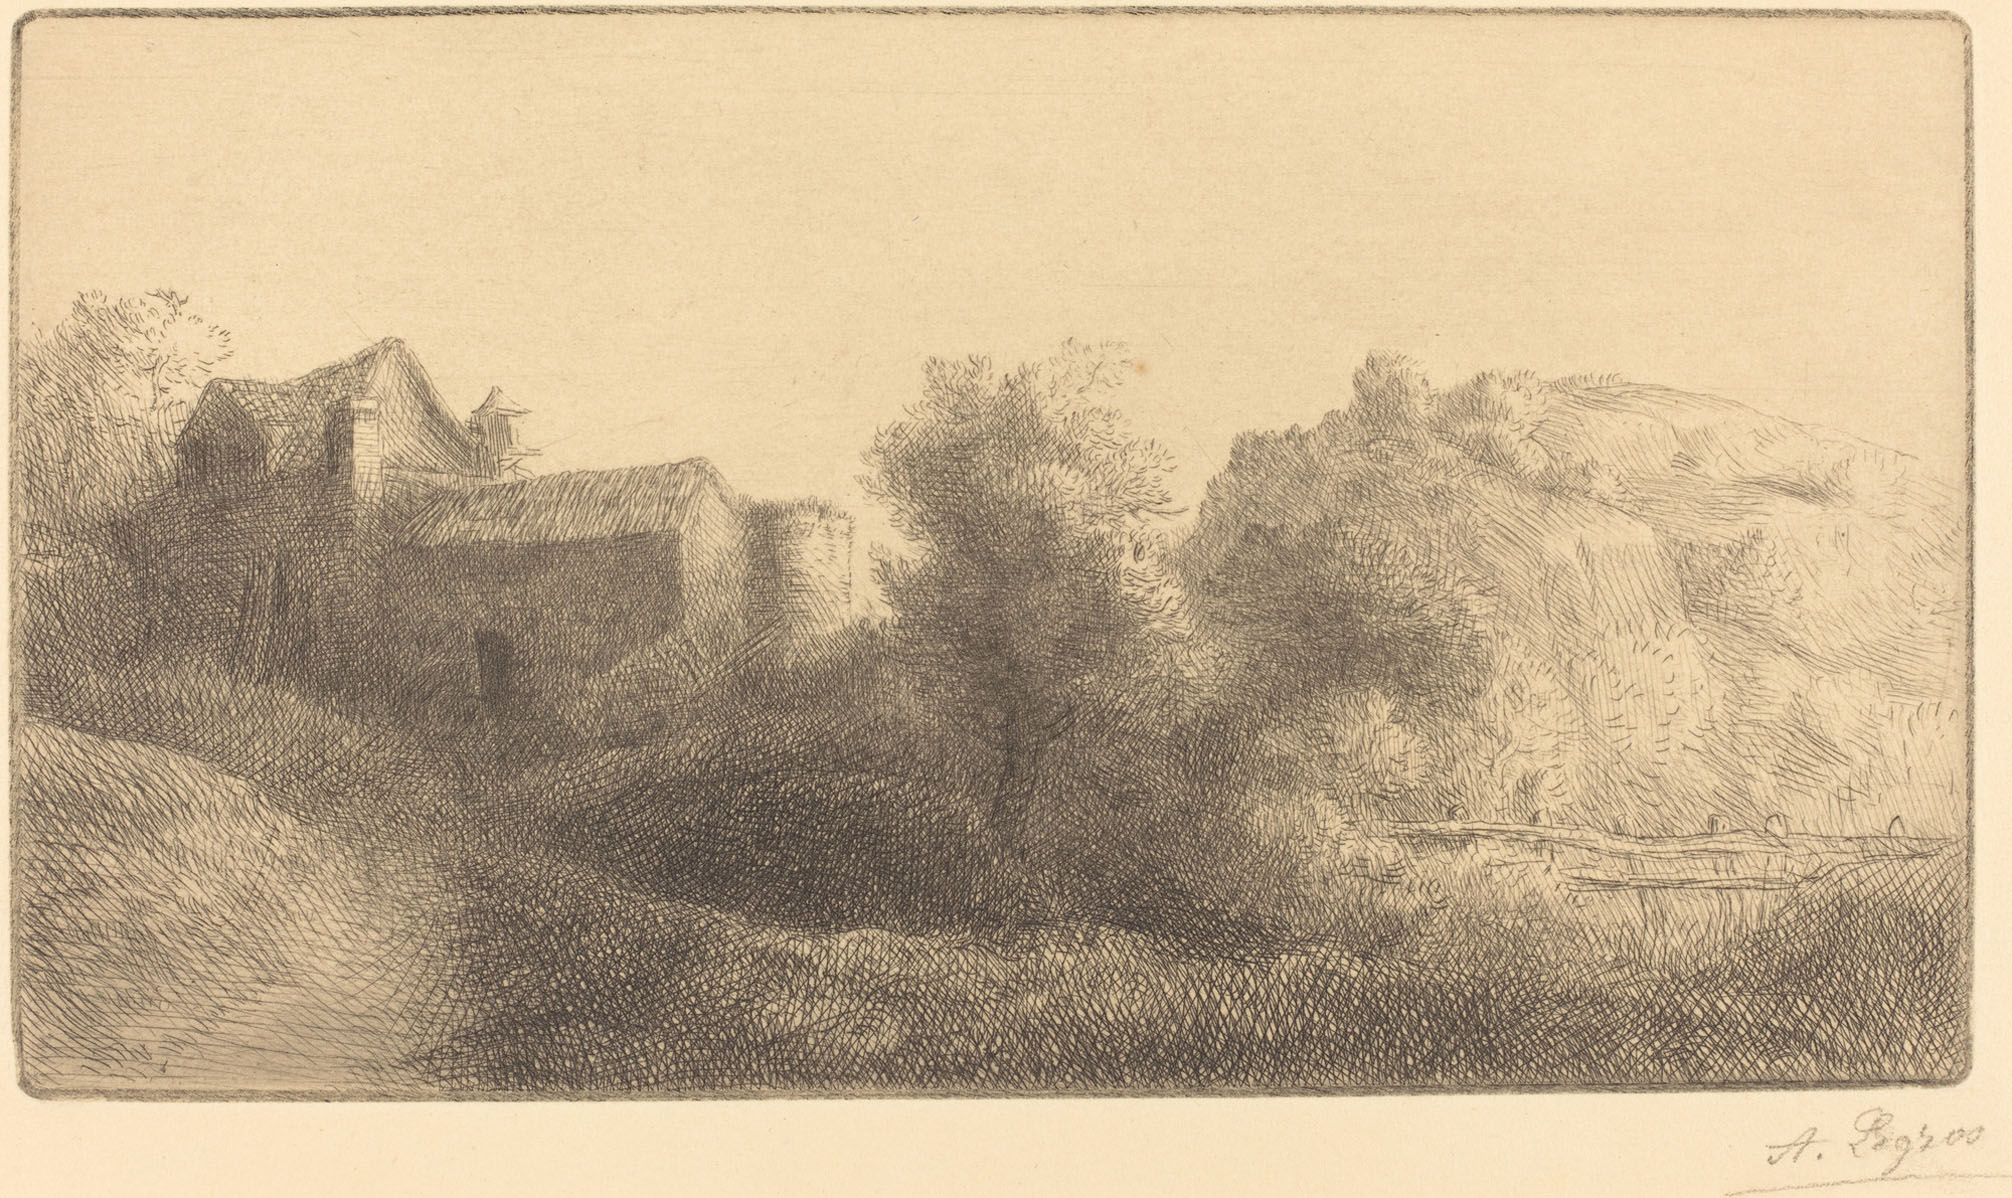 Alphonse Legros, Bridge at the Mill (Le pont du moulin), French, 1837 - 1911, , etching and drypoint, Gift of George Matthew Adams in memory of his mother, Lydia Havens Adams